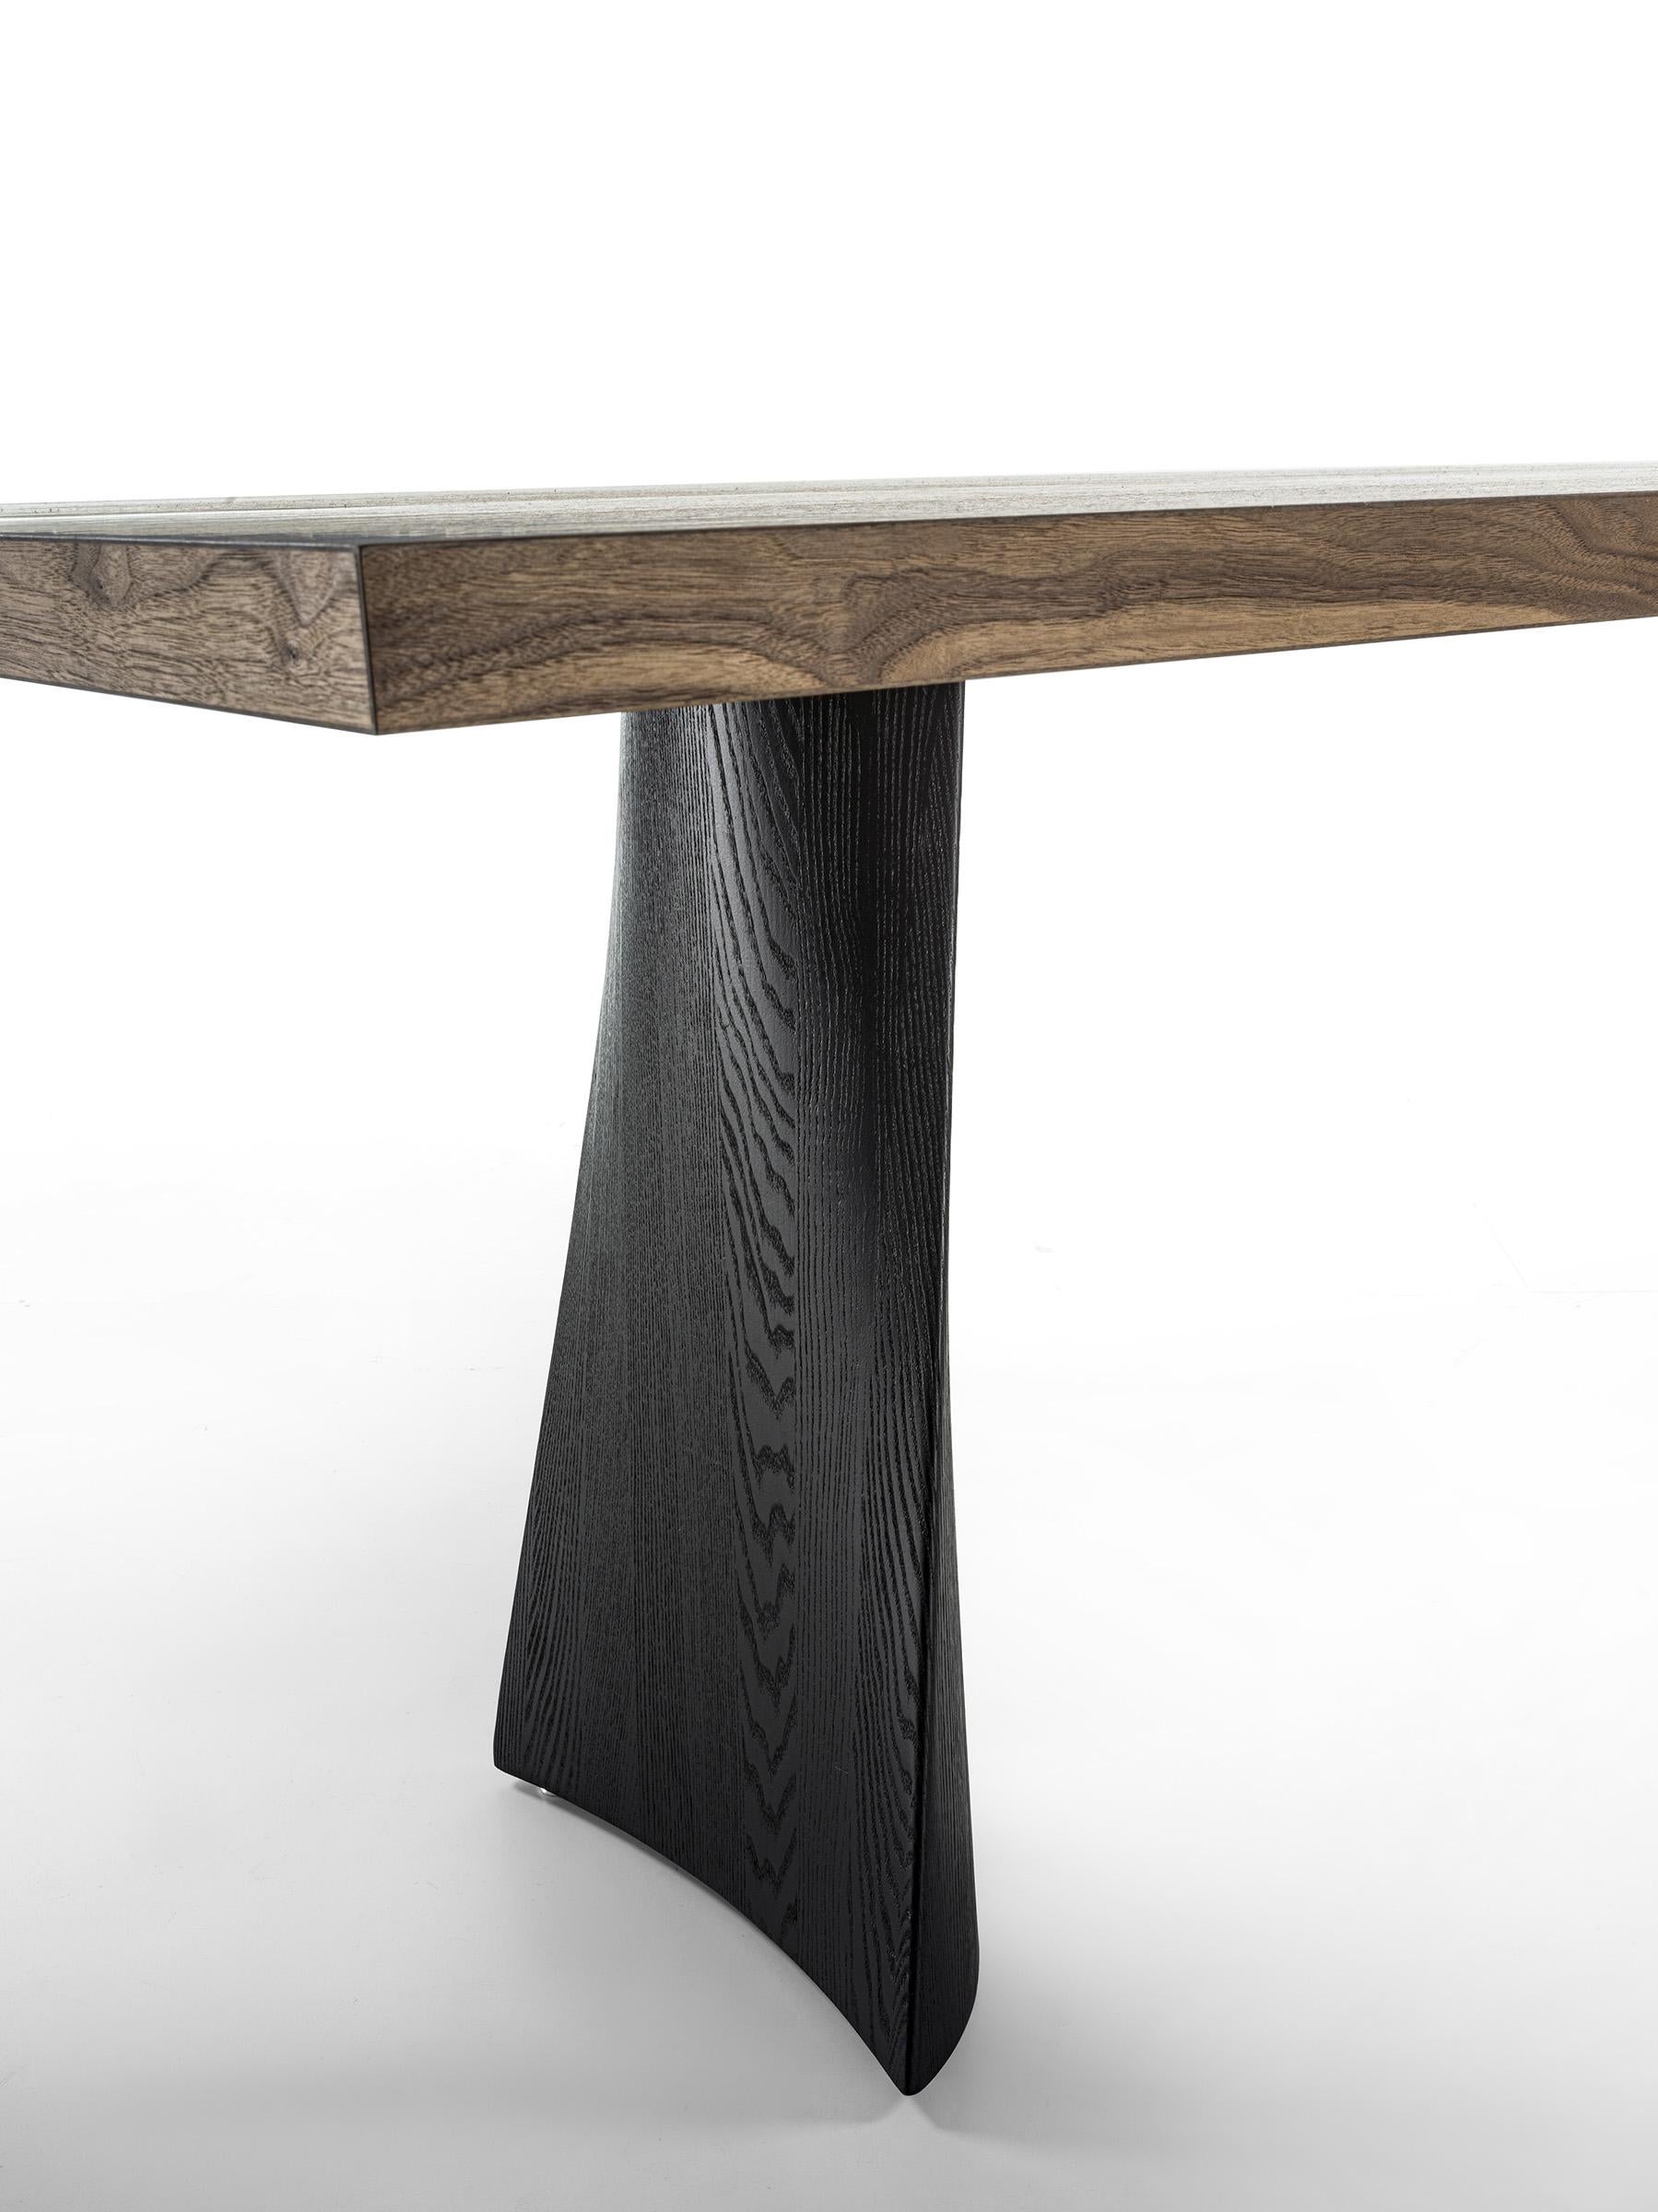 Italian Simple Swing Wood Table, Designed by Studio Excalibur, Made in Italy For Sale